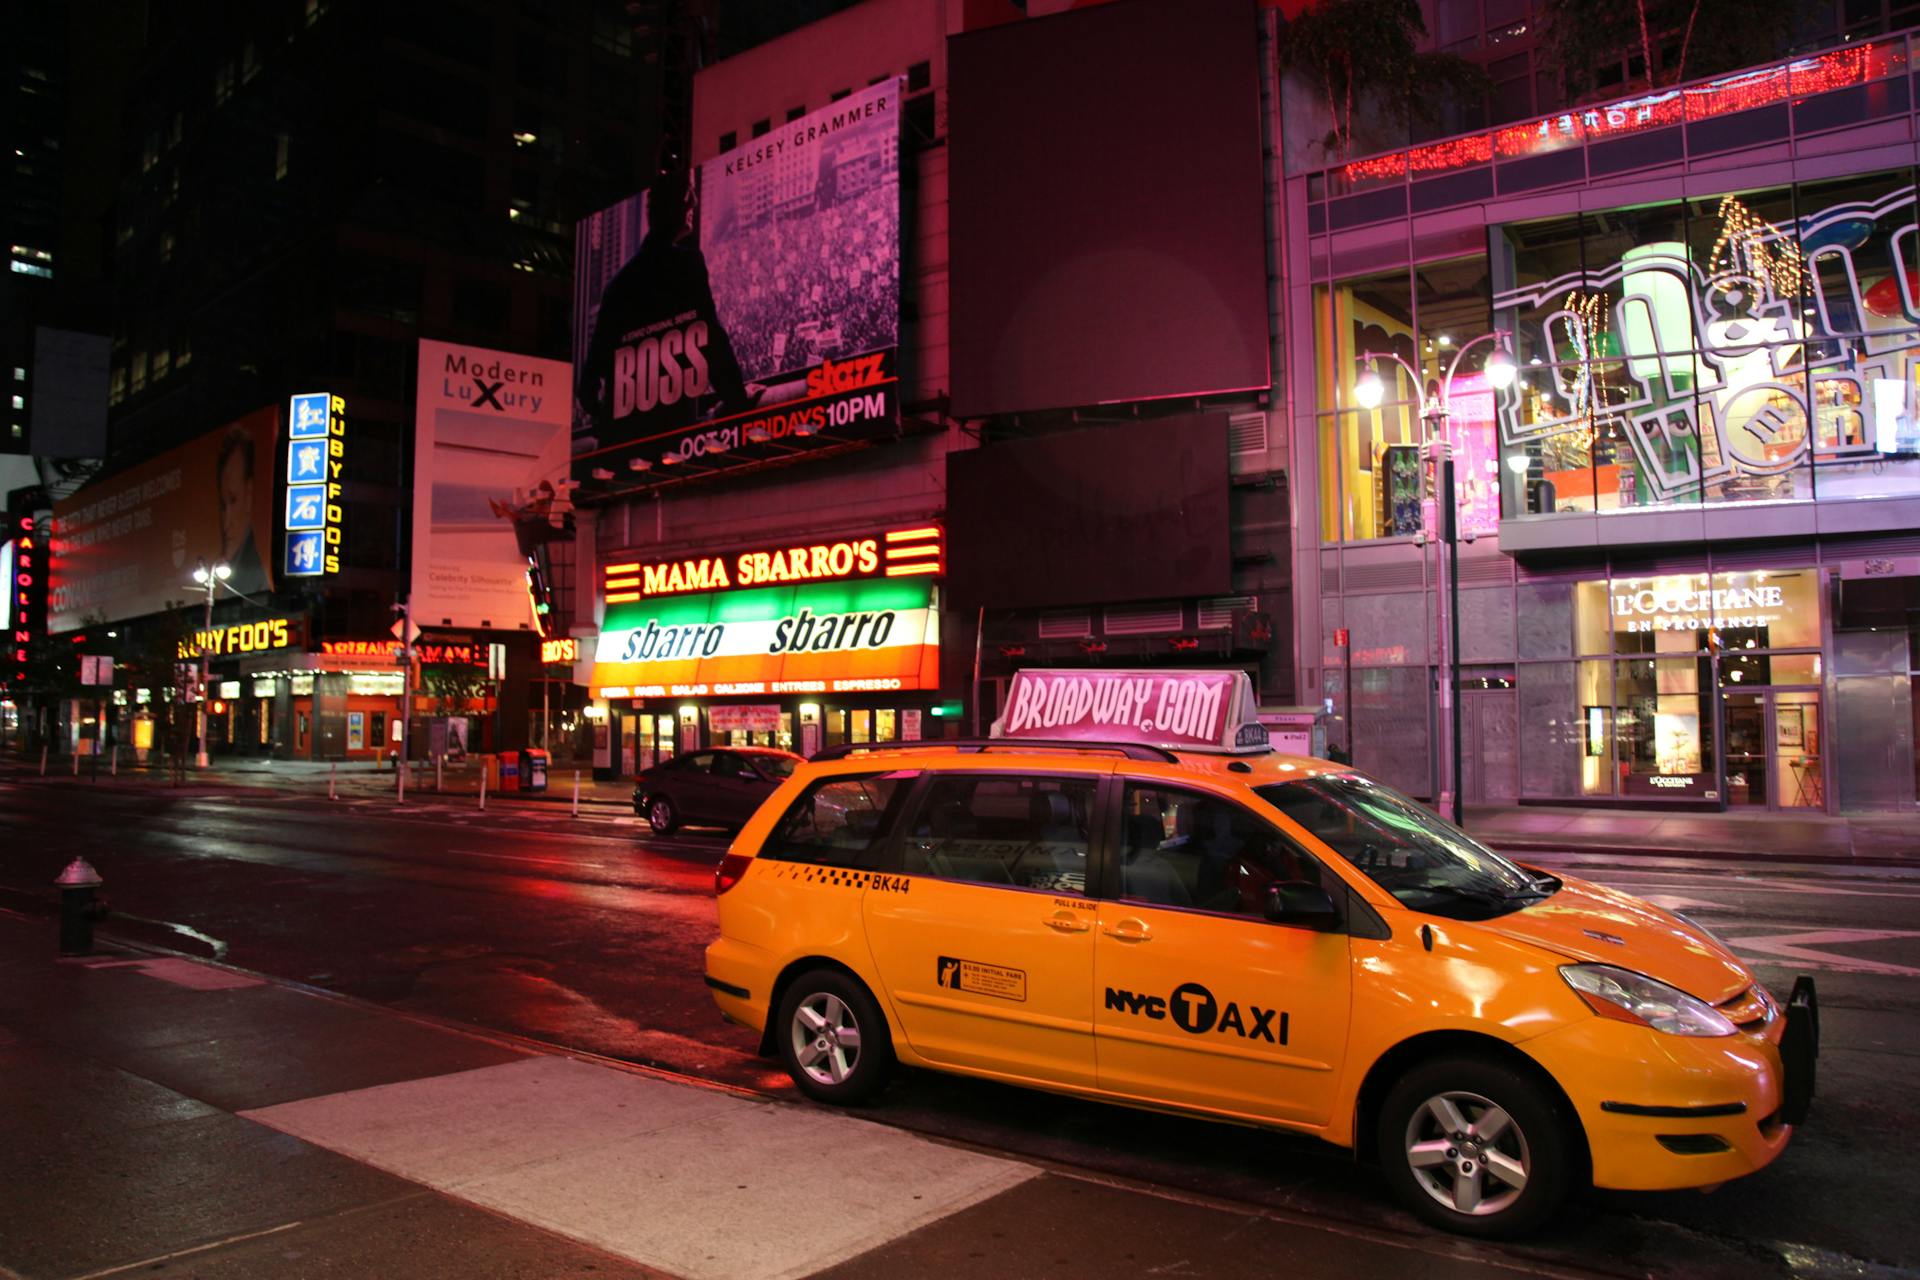 A yellow cab on a road during the night | Source: Pexels